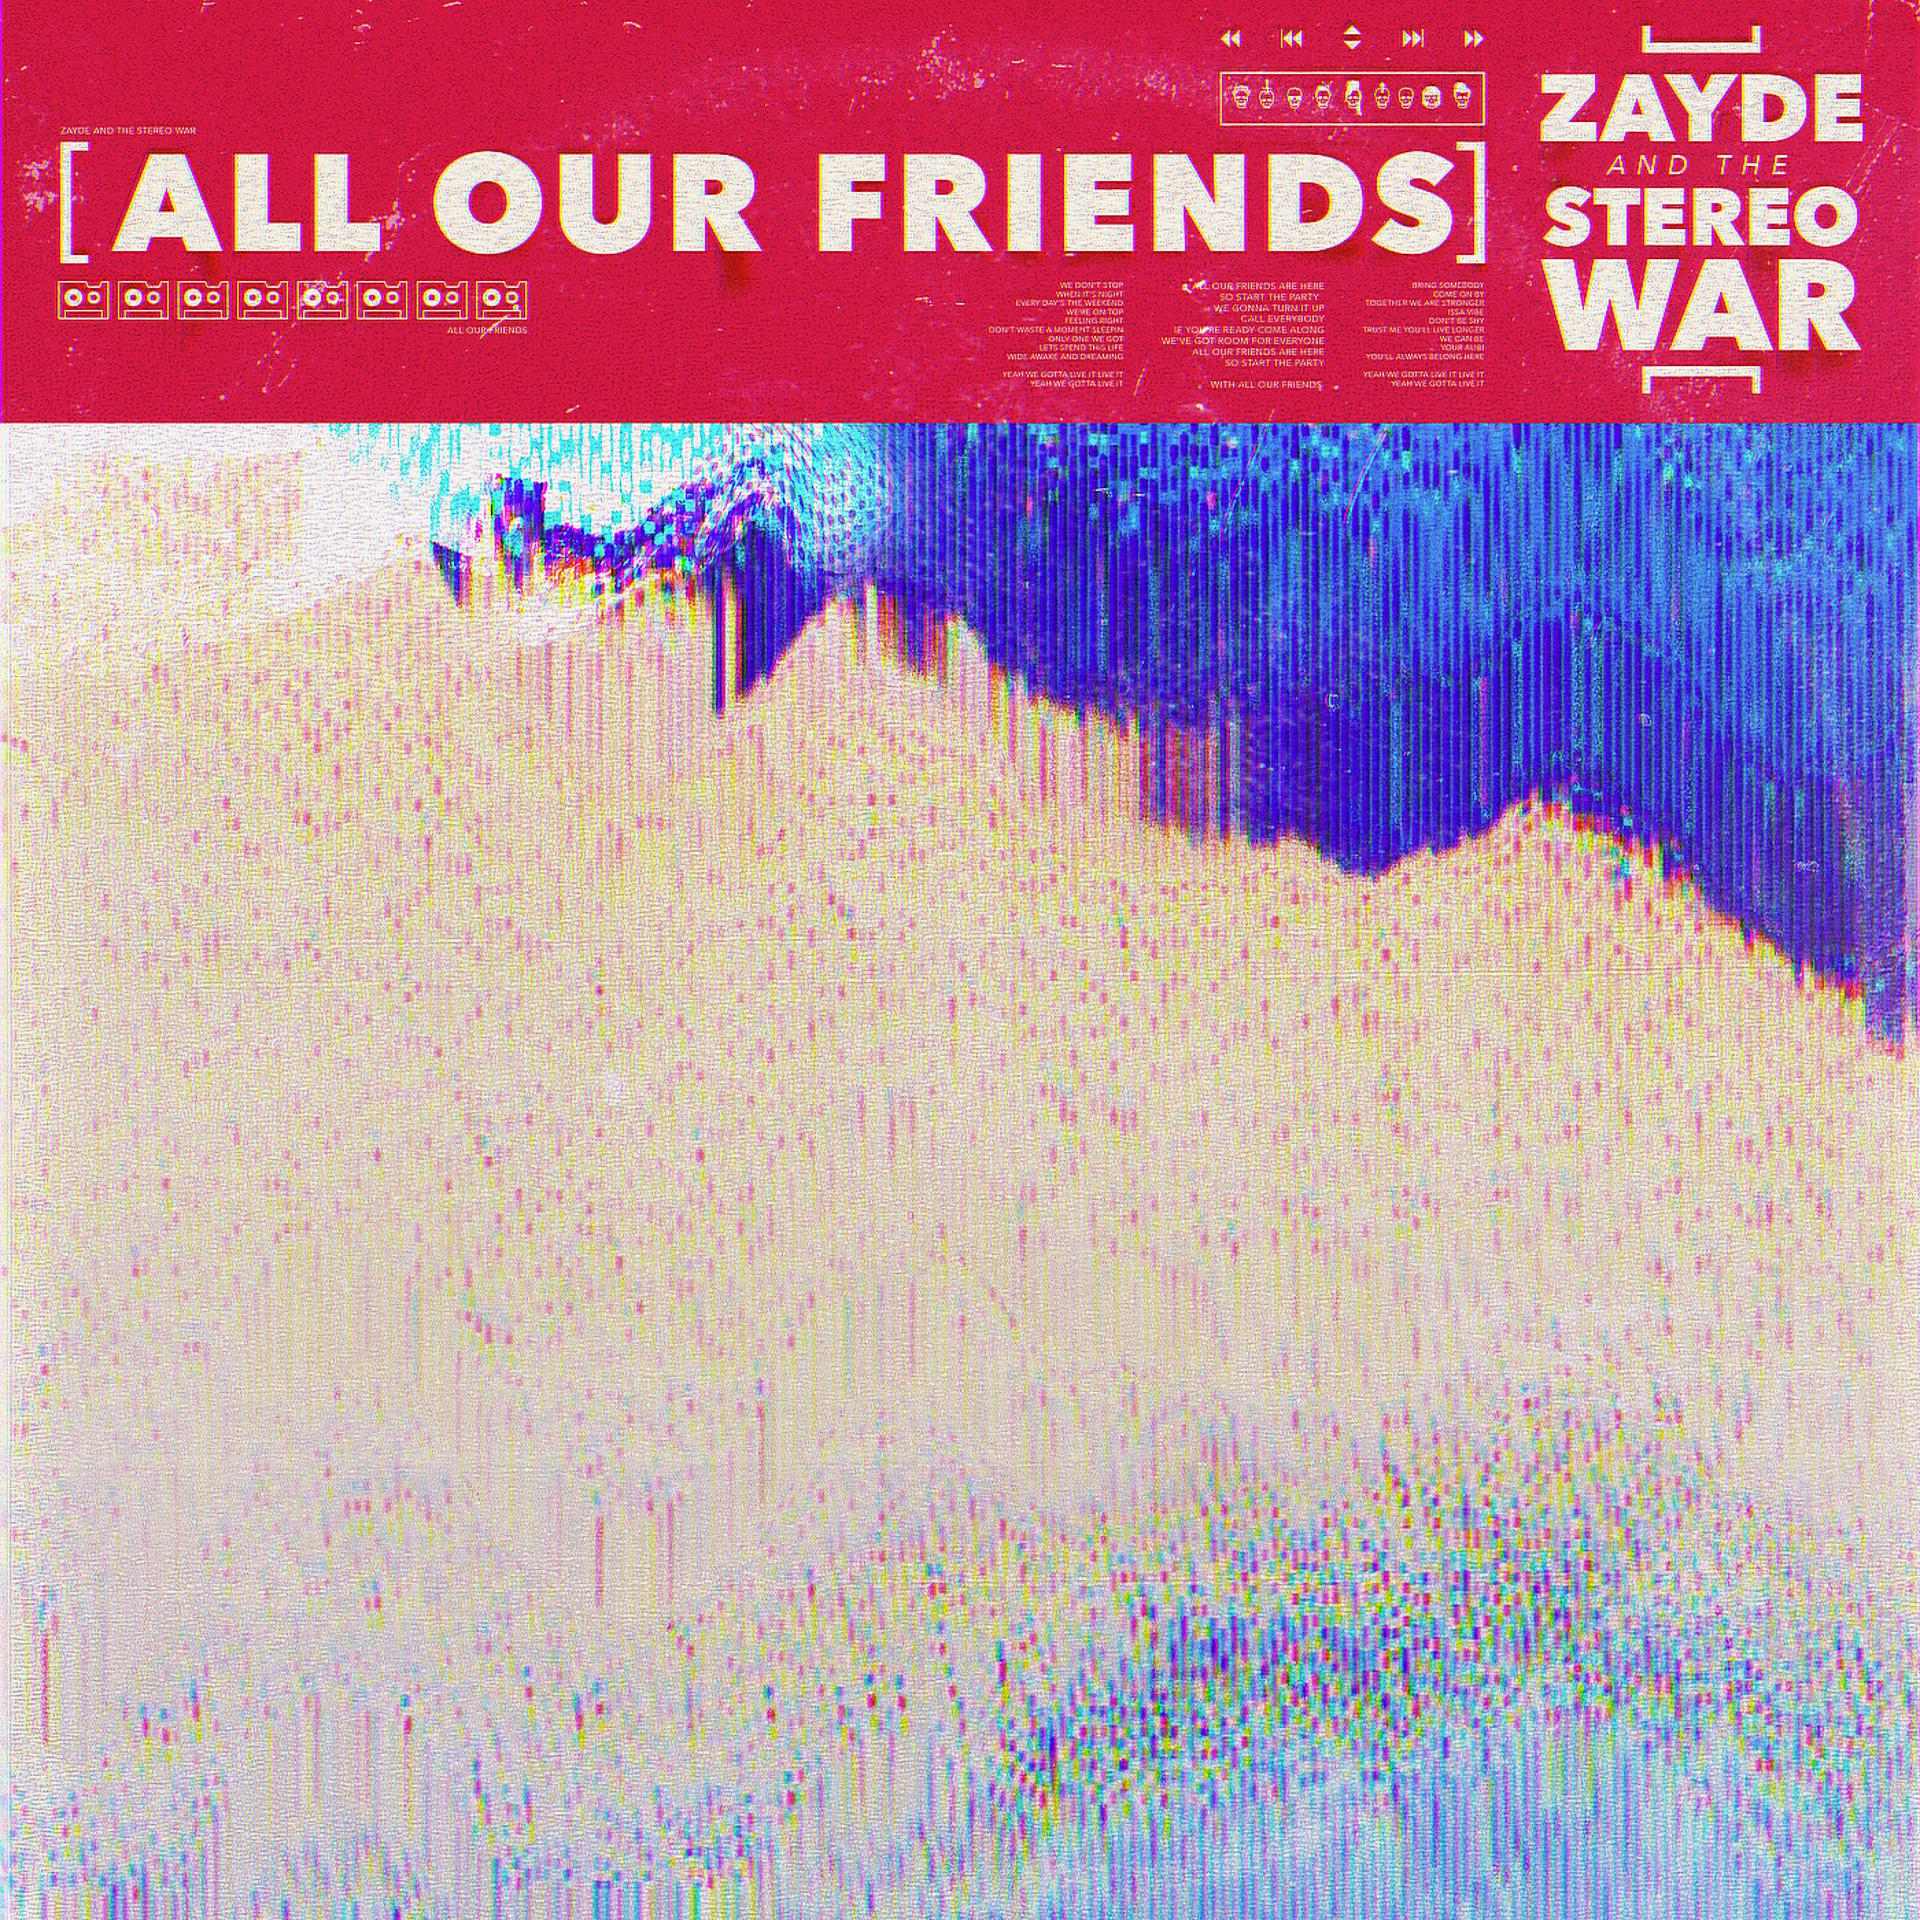 Постер к треку Zayde and the Stereo War, Zayde Wølf, Duncan Sparks - All Our Friends